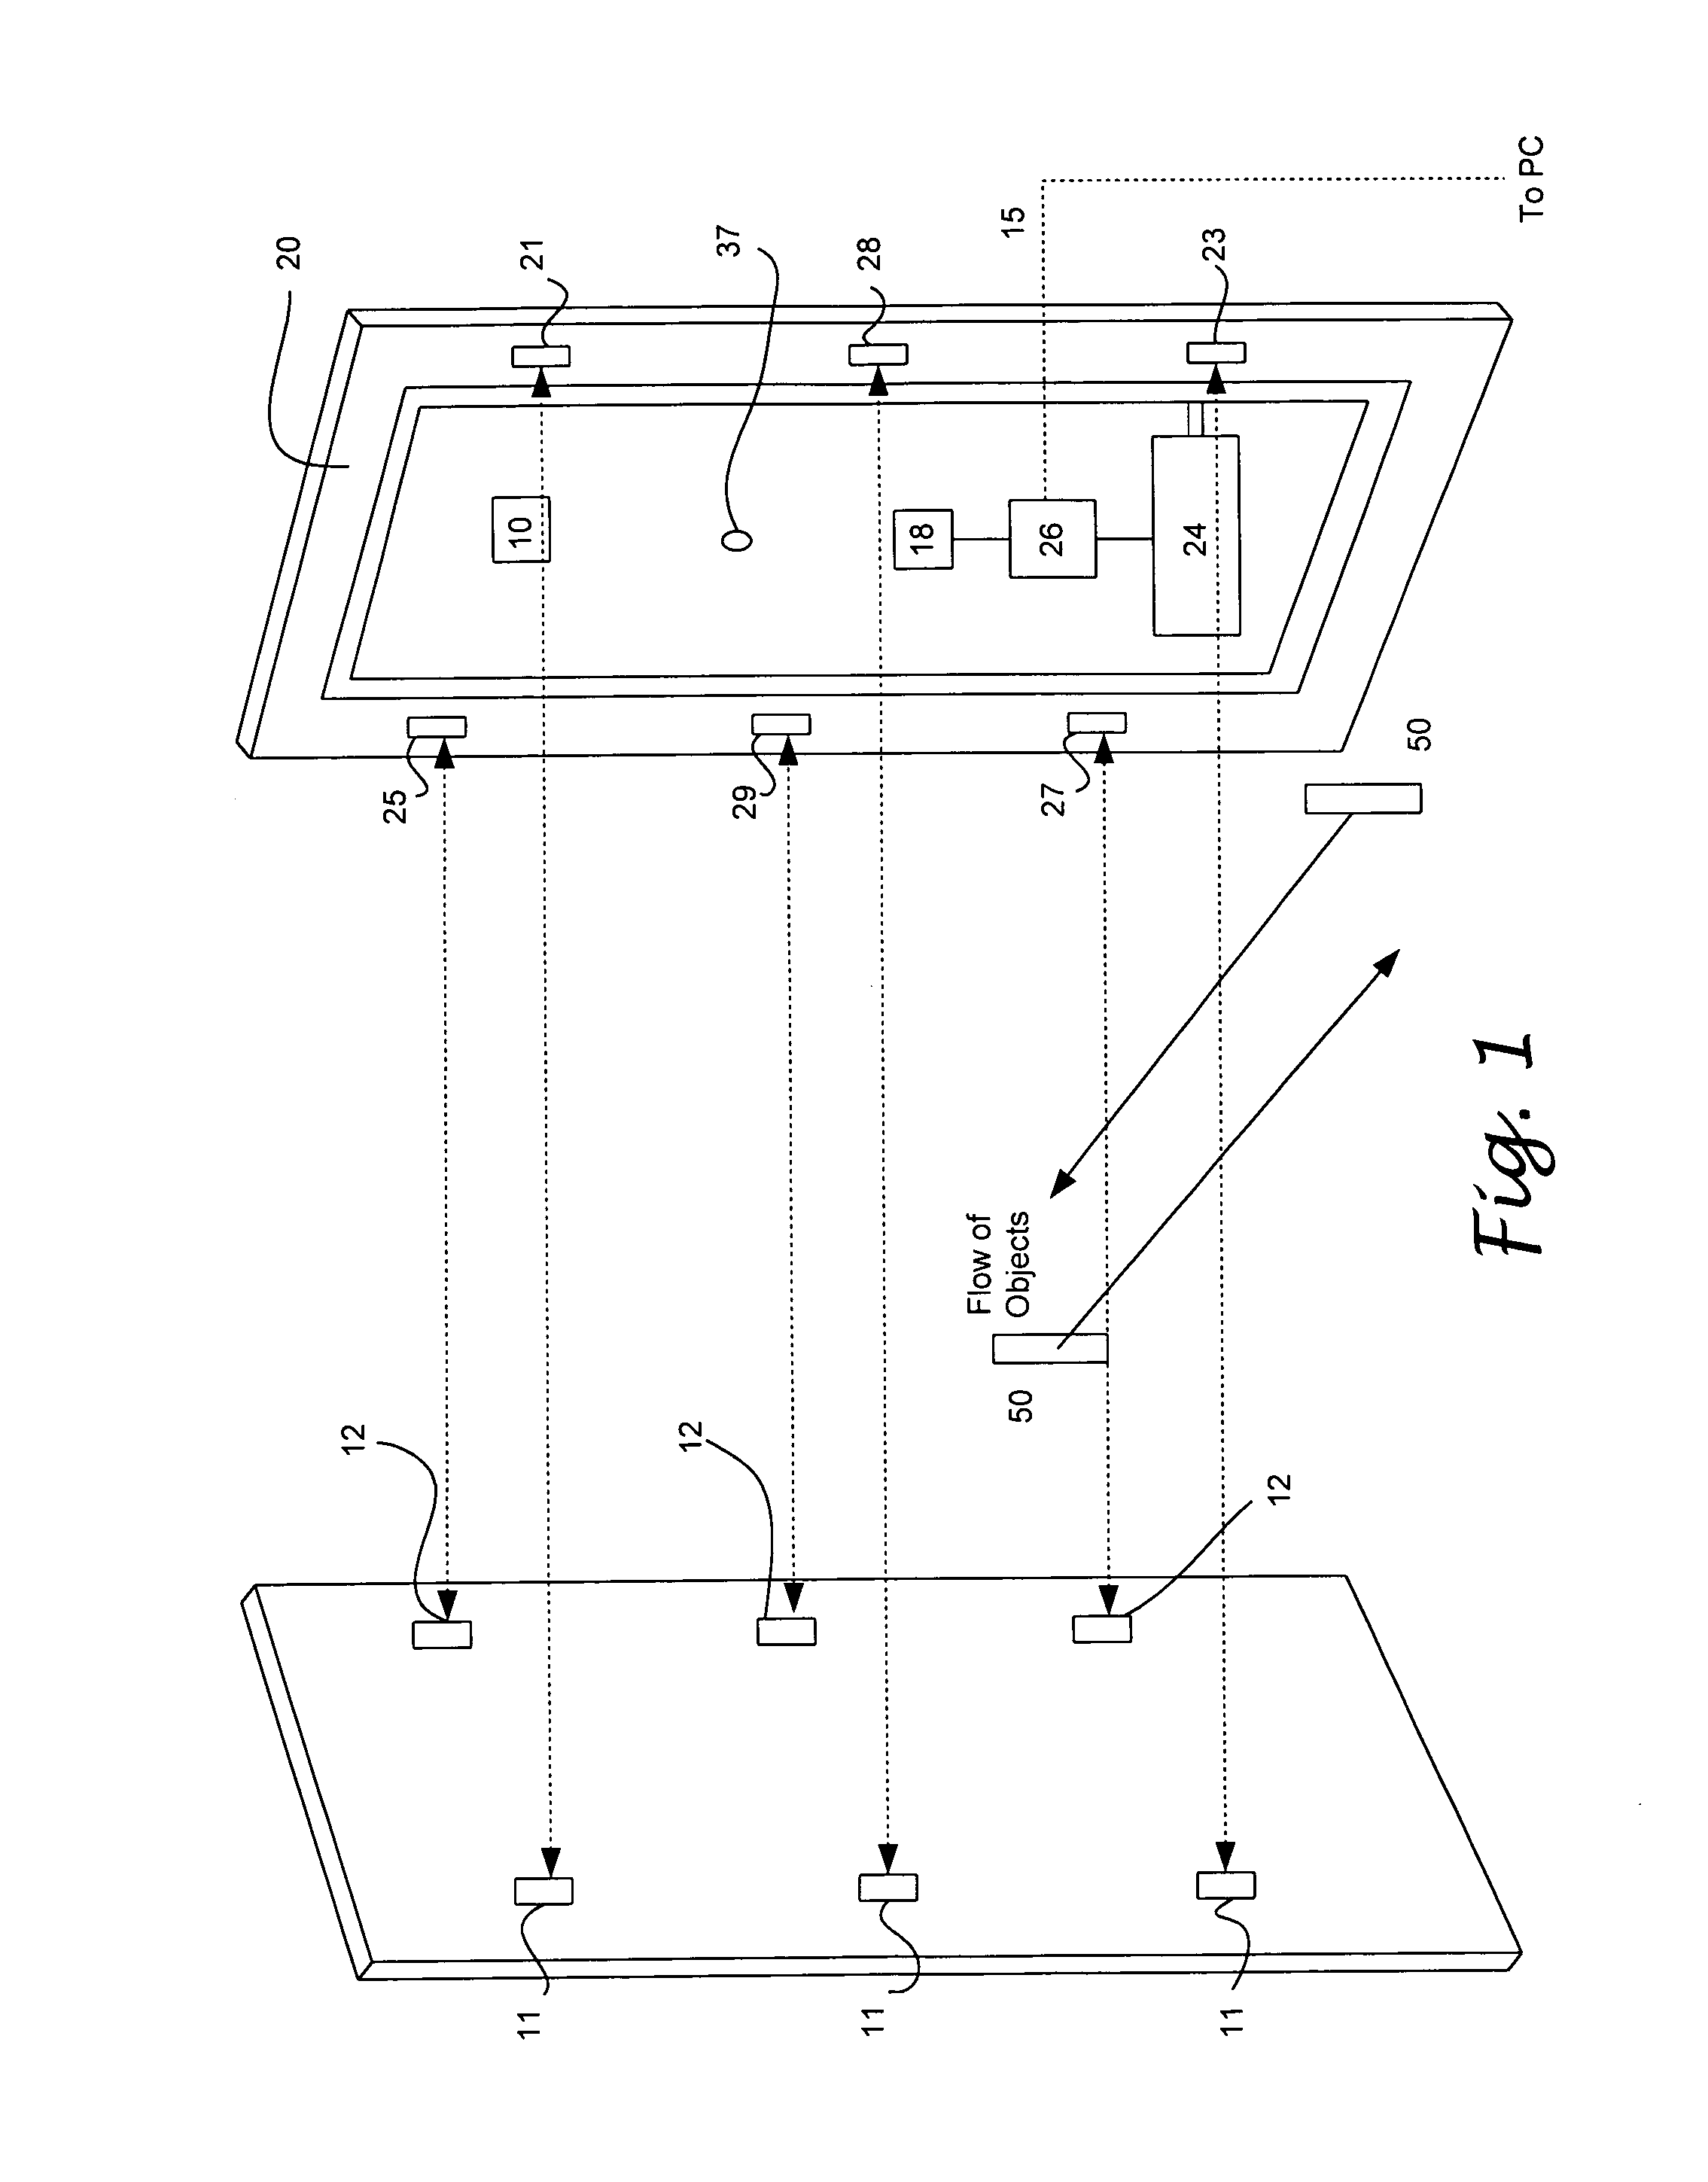 Electronic vehicle product and personal monitoring